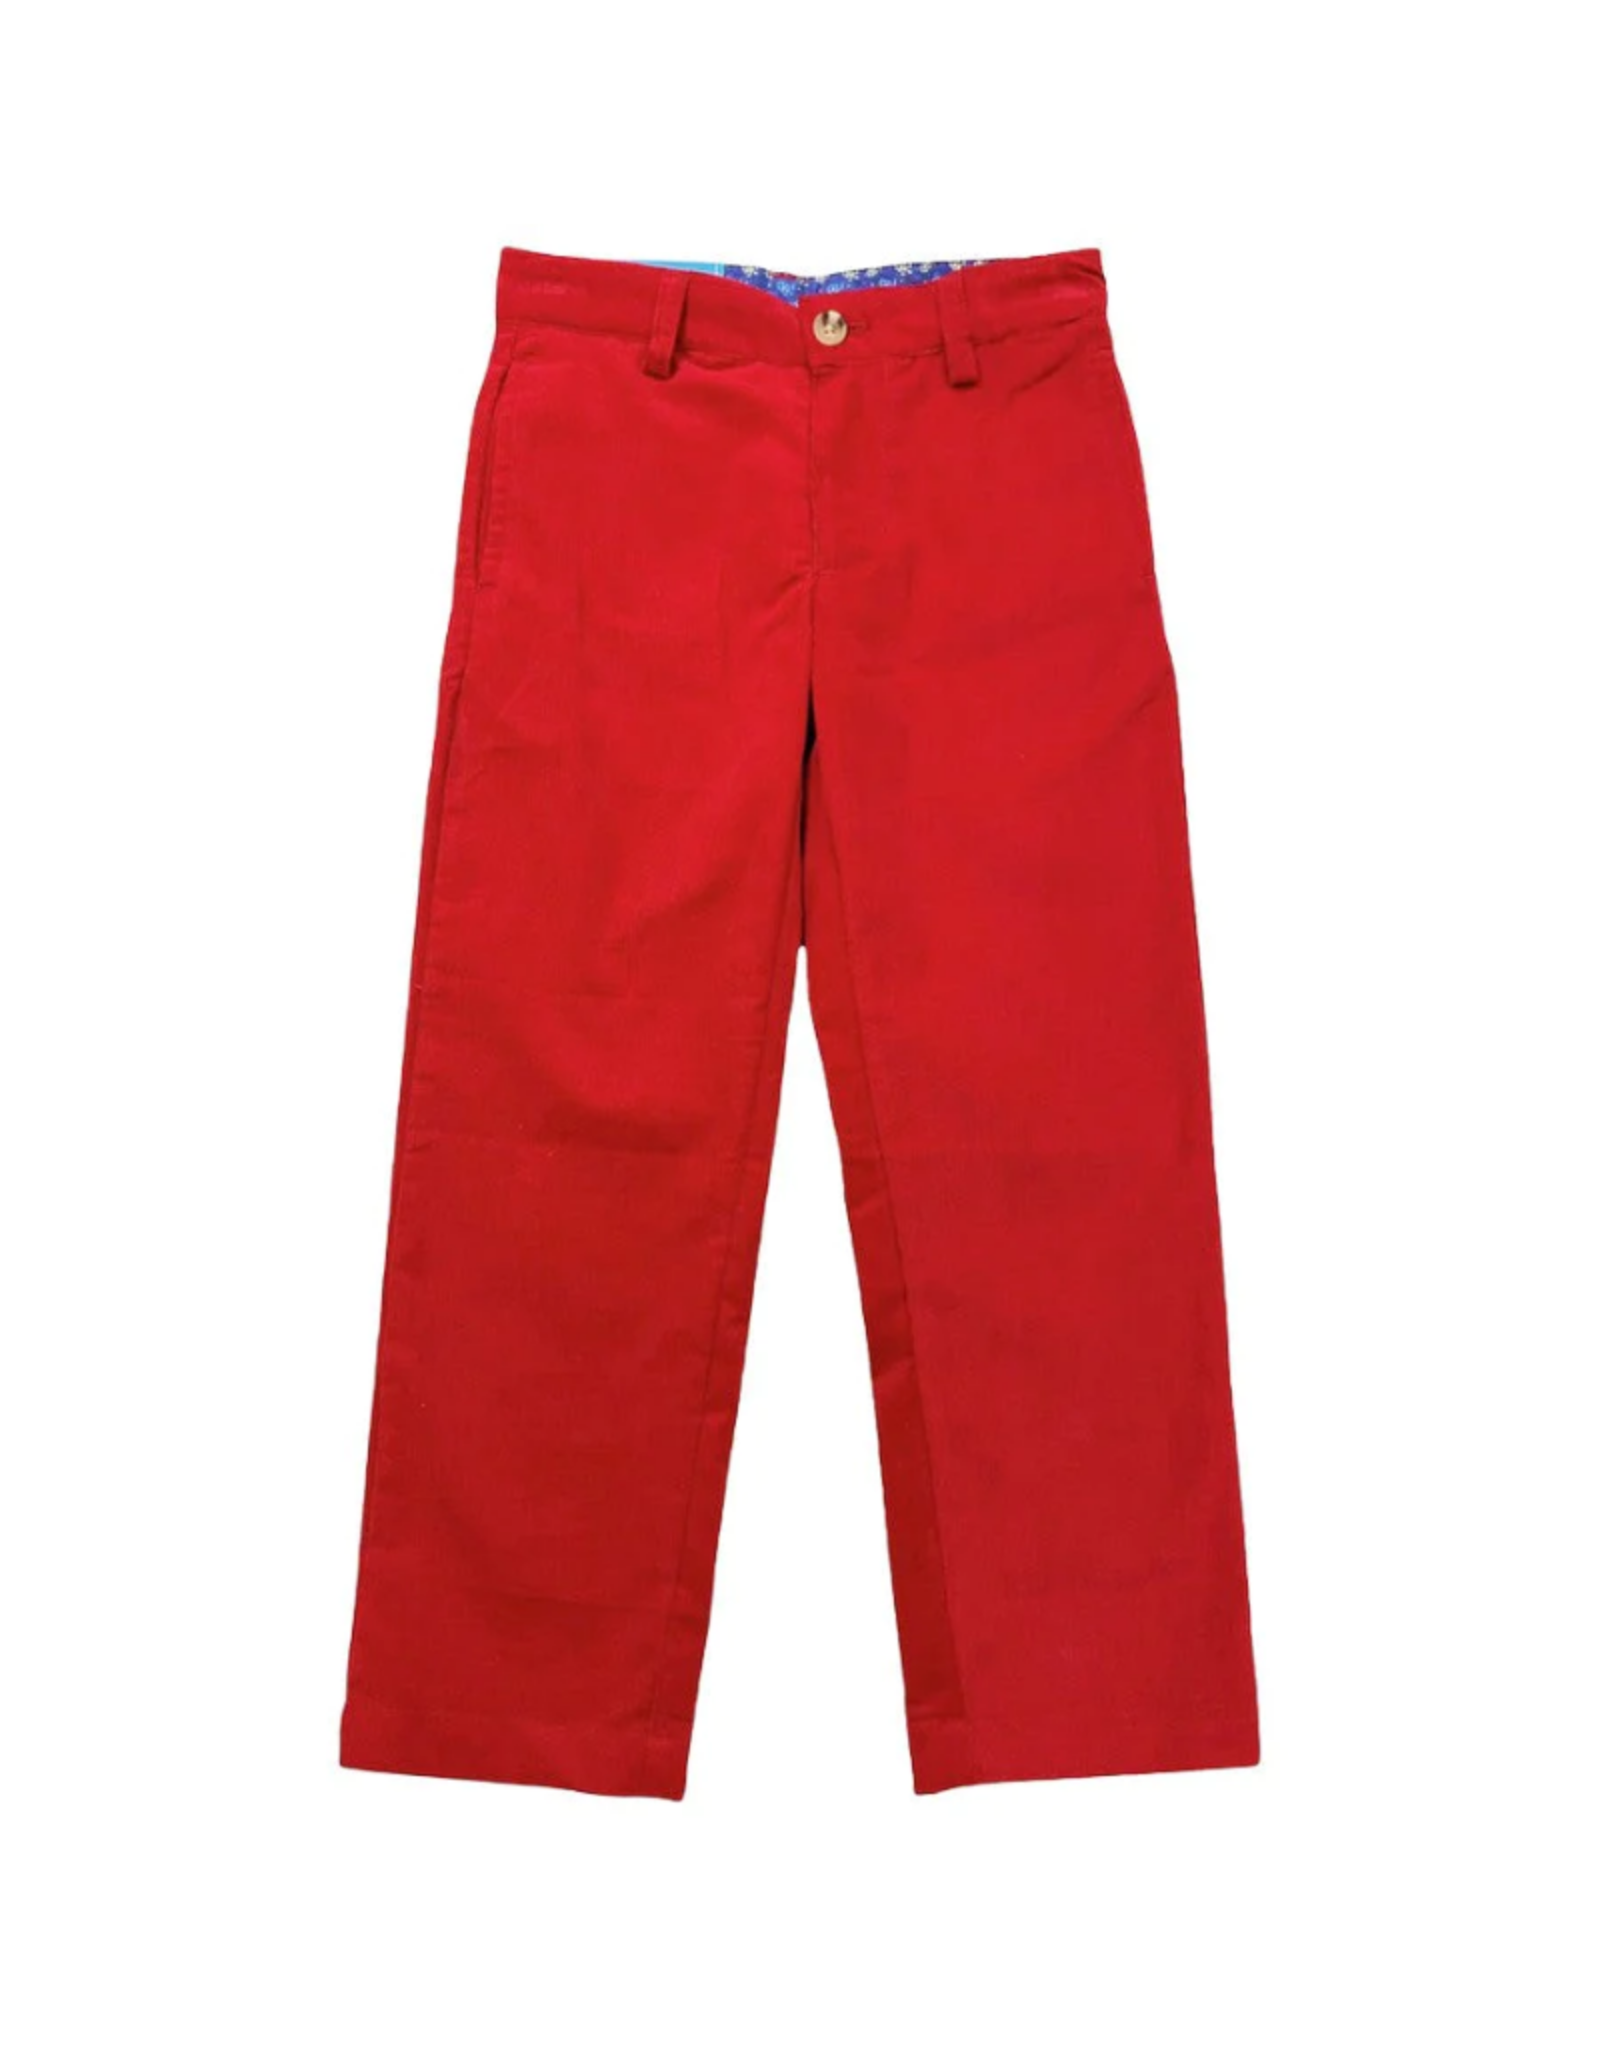 The Bailey Boys Champ Pant Cord Red